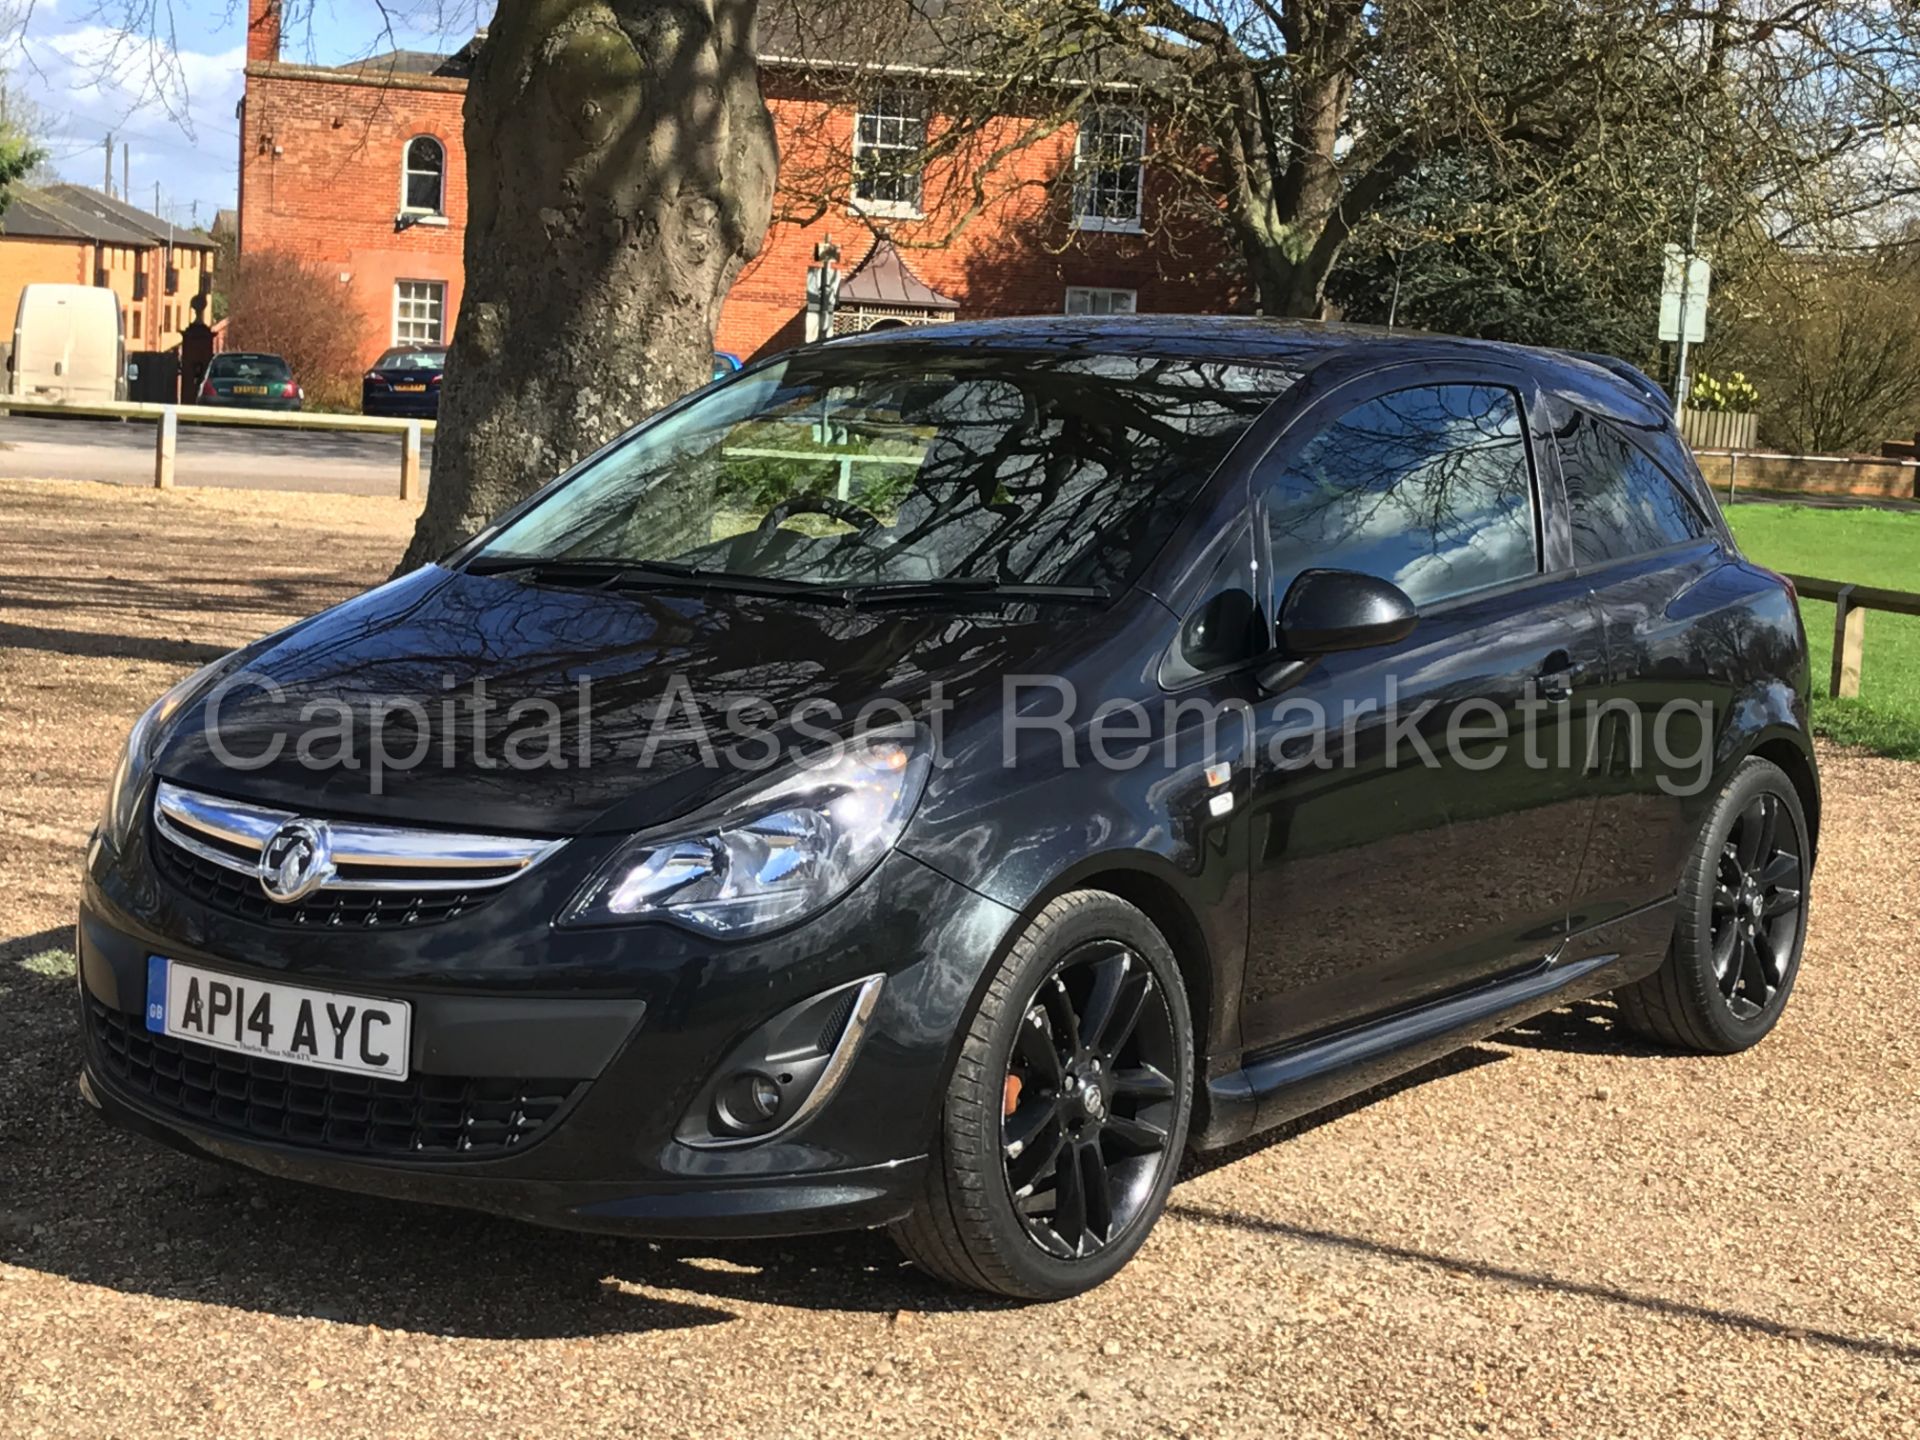 ON SALE VAUXHALL CORSA 'LIMITED EDITION' (2014) 'CDTI - 5 SPEED - AIR CON - ELEC PACK' (1 OWNER - Image 3 of 25